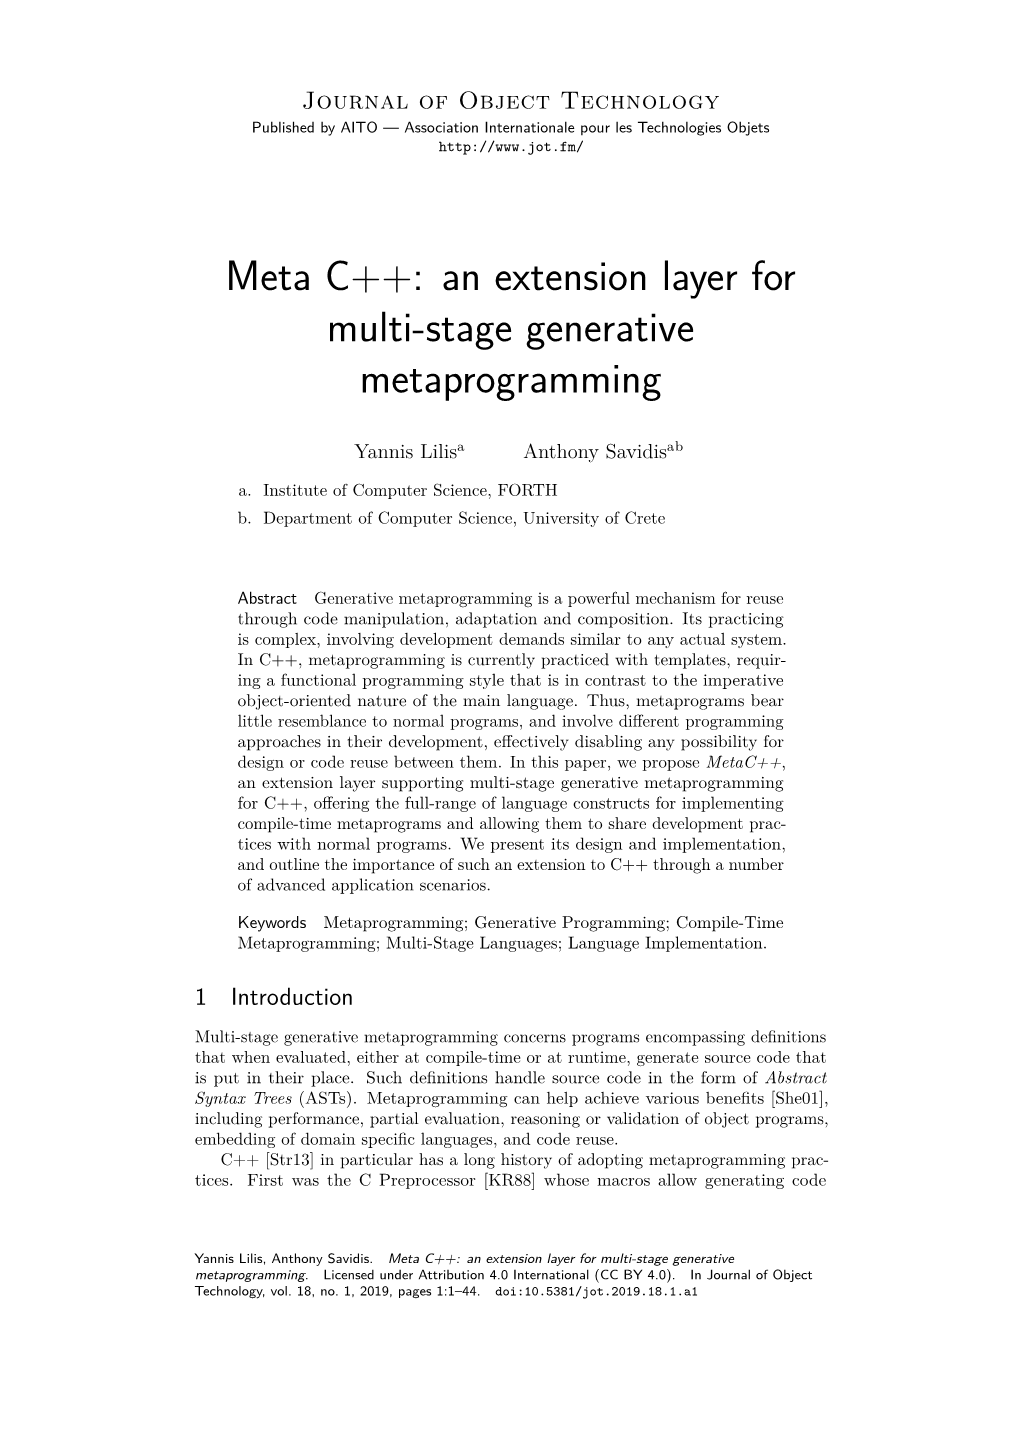 Meta C++: an Extension Layer for Multi-Stage Generative Metaprogramming